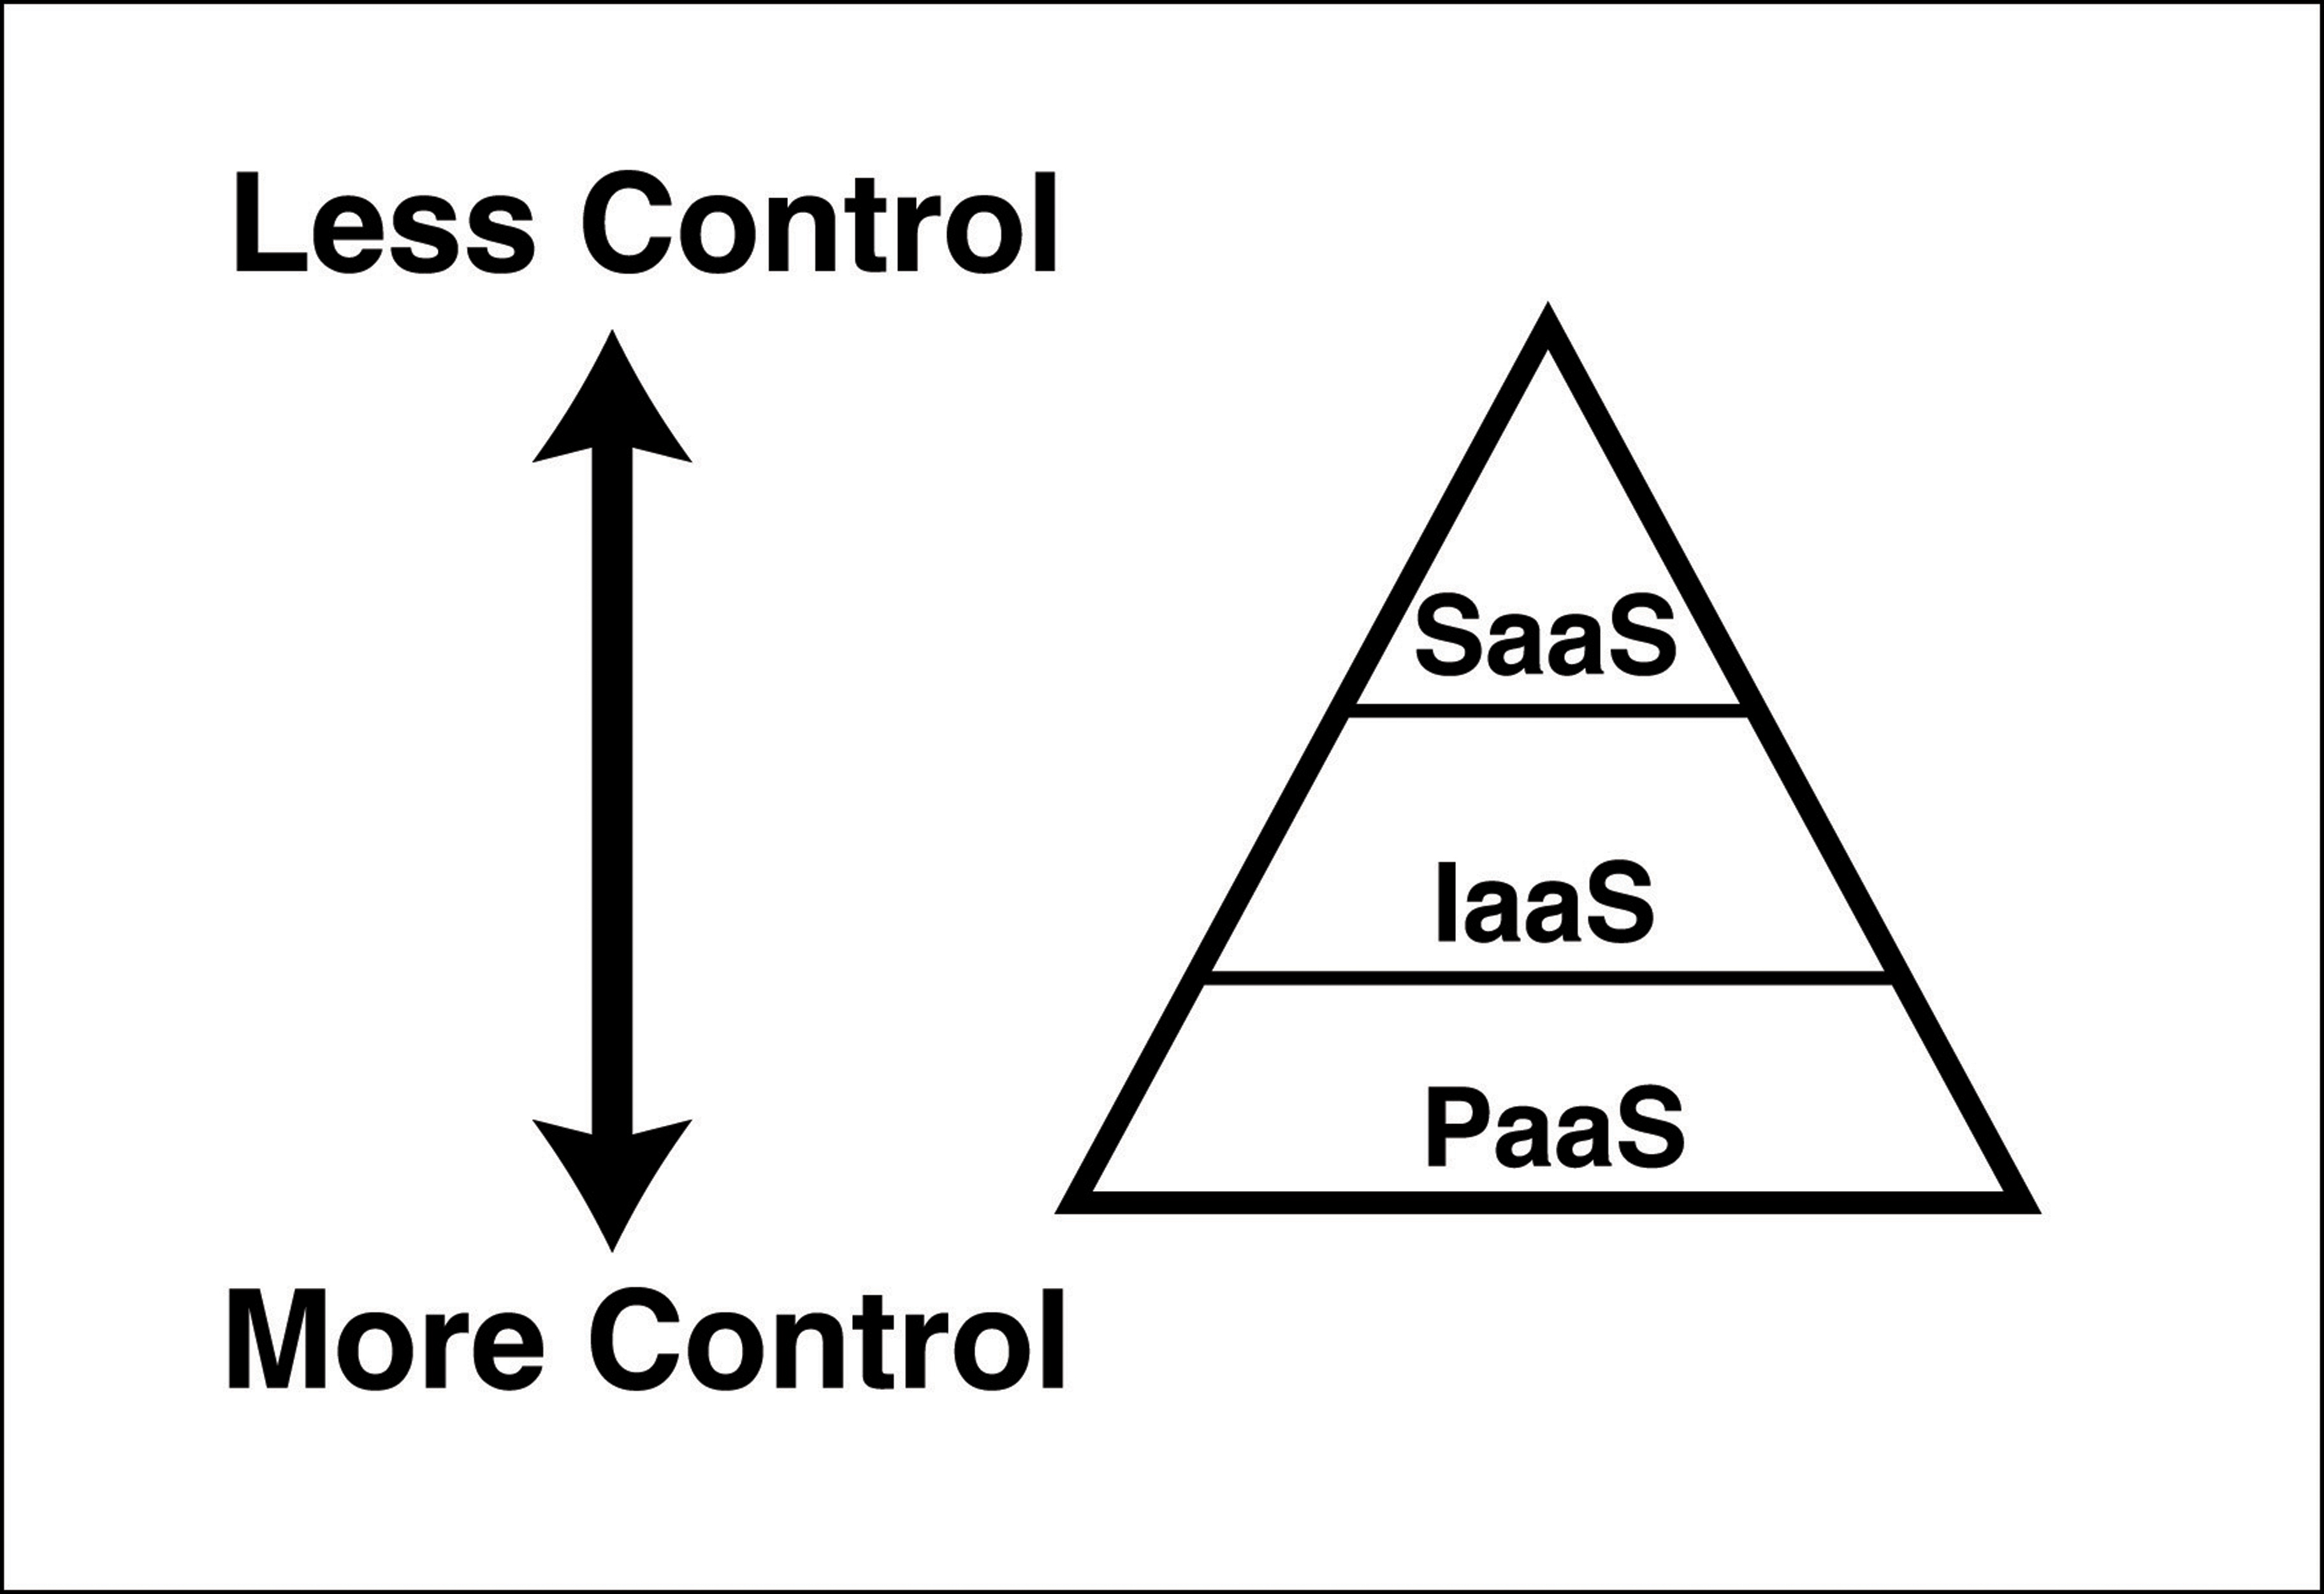 The cloud pyramid shows the relationship between service types and the amount of control a user has.